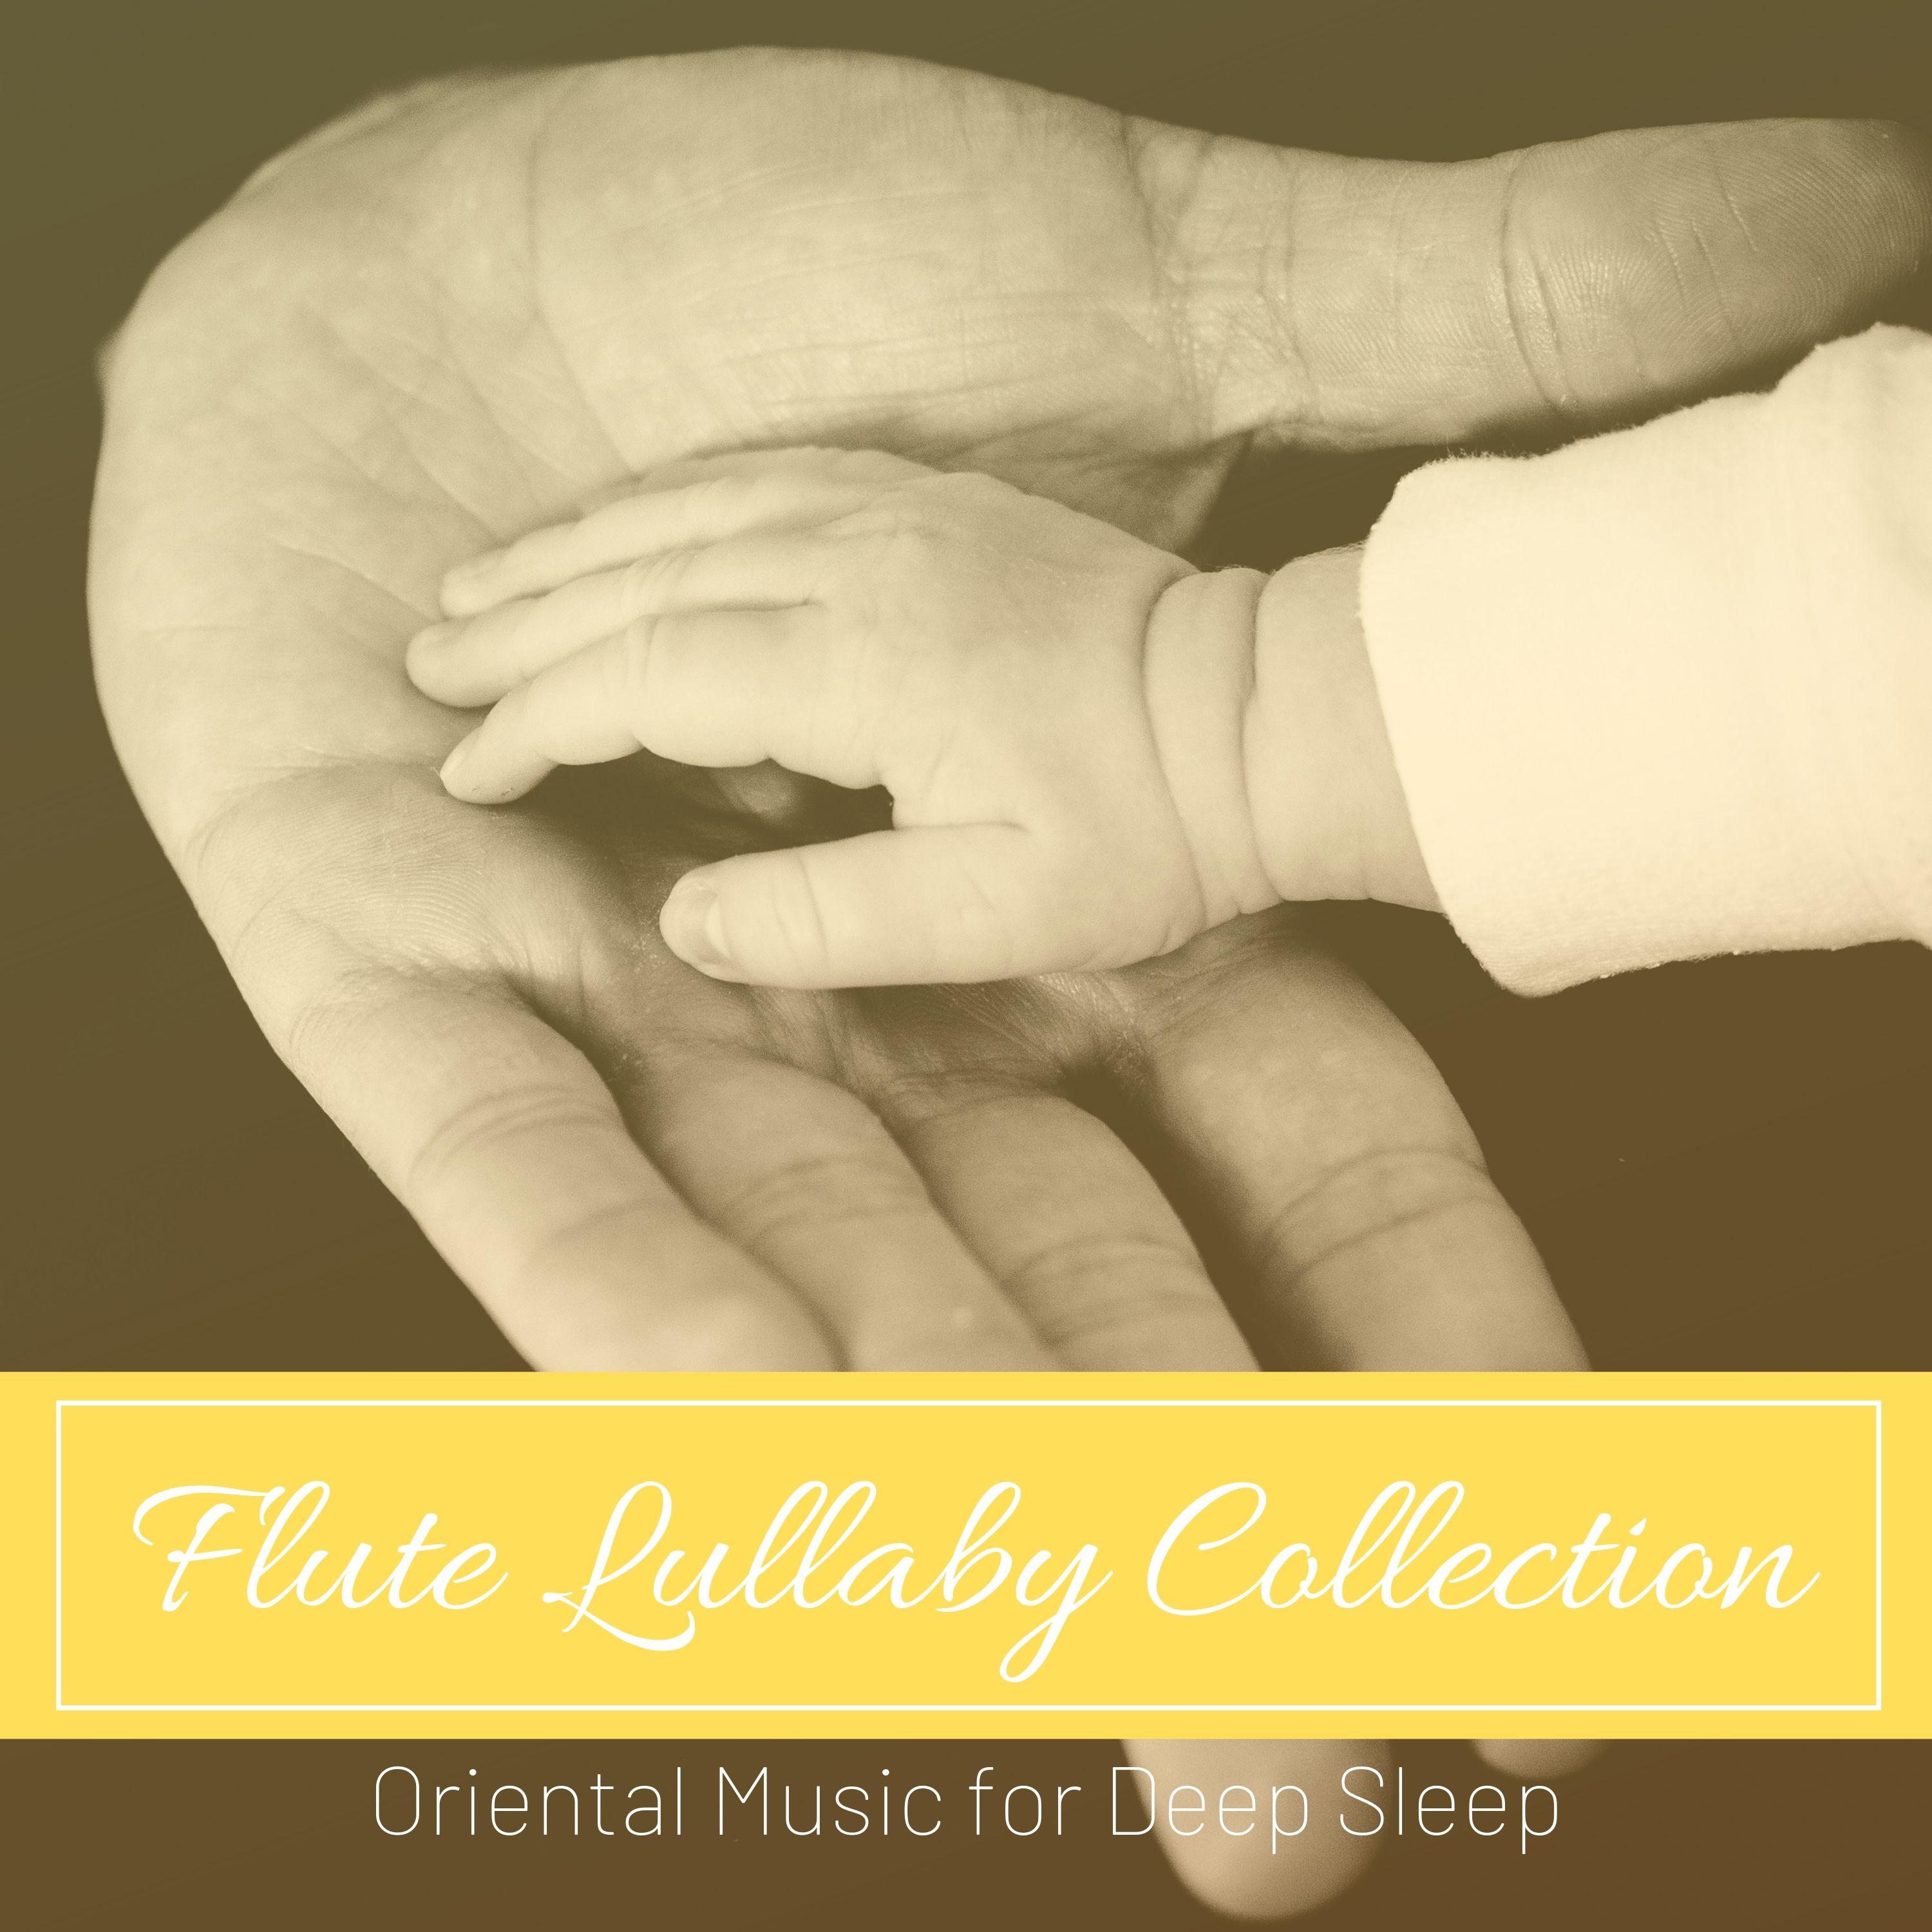 Flute Lullaby Collection - Oriental Music for Deep Sleep